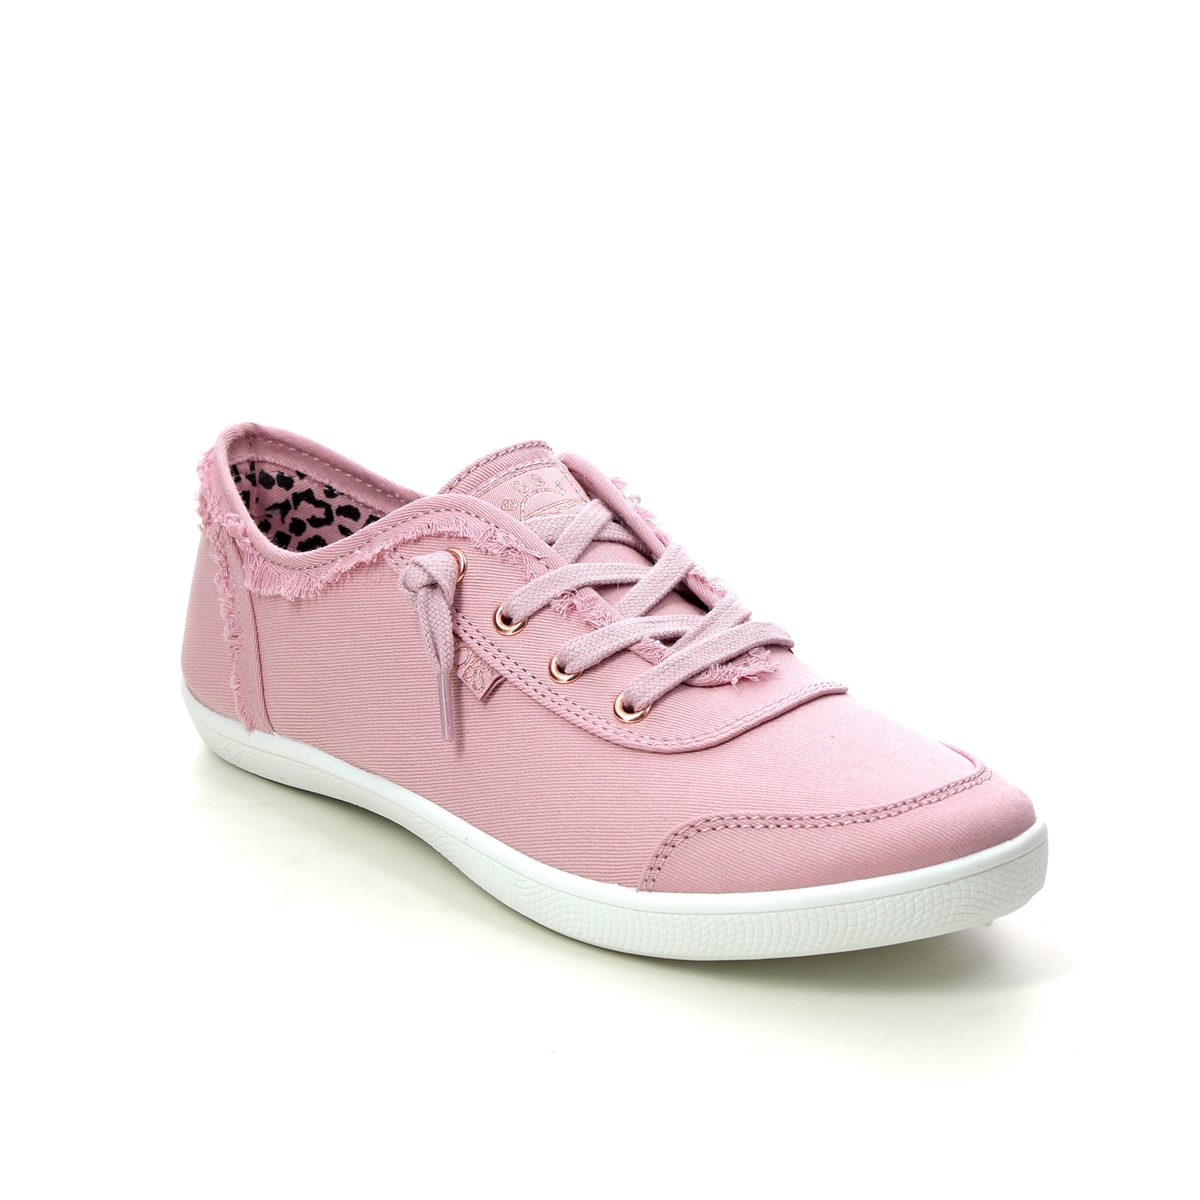 Skechers Bobs B Cute ROS ROSE Womens trainers 33492 in a Plain Canvas in Size 4